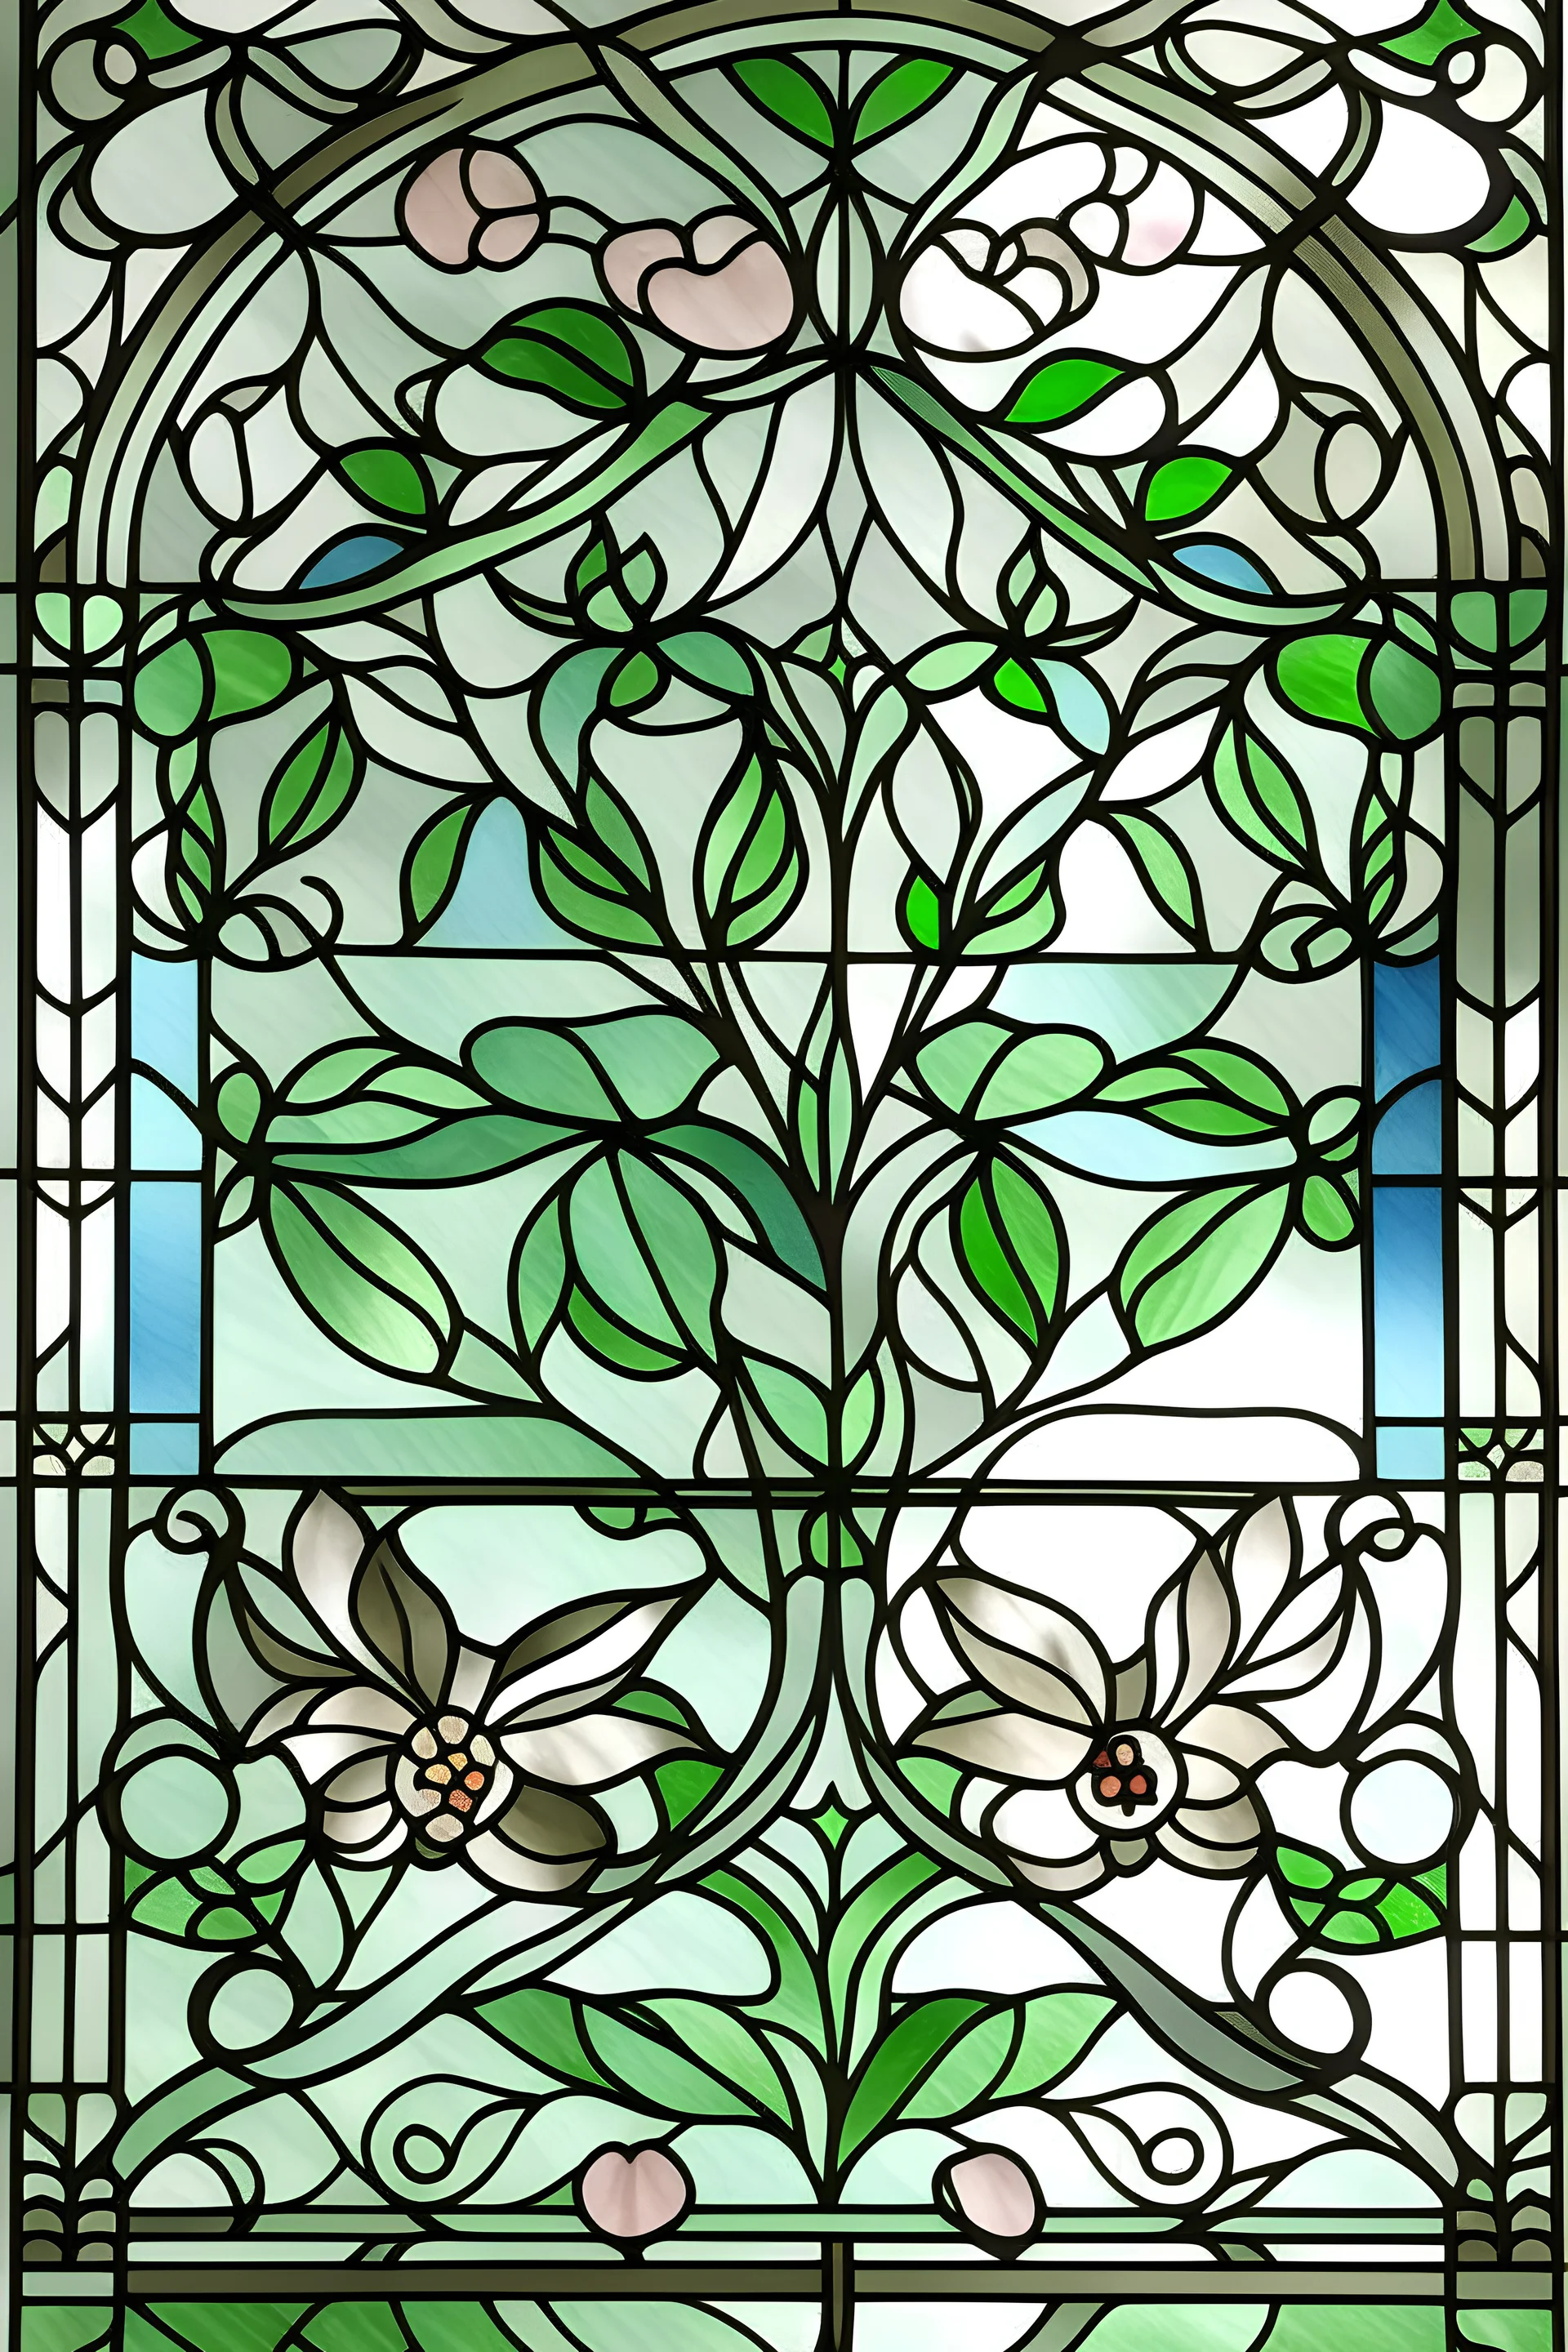 Stain glass of flowers and vines